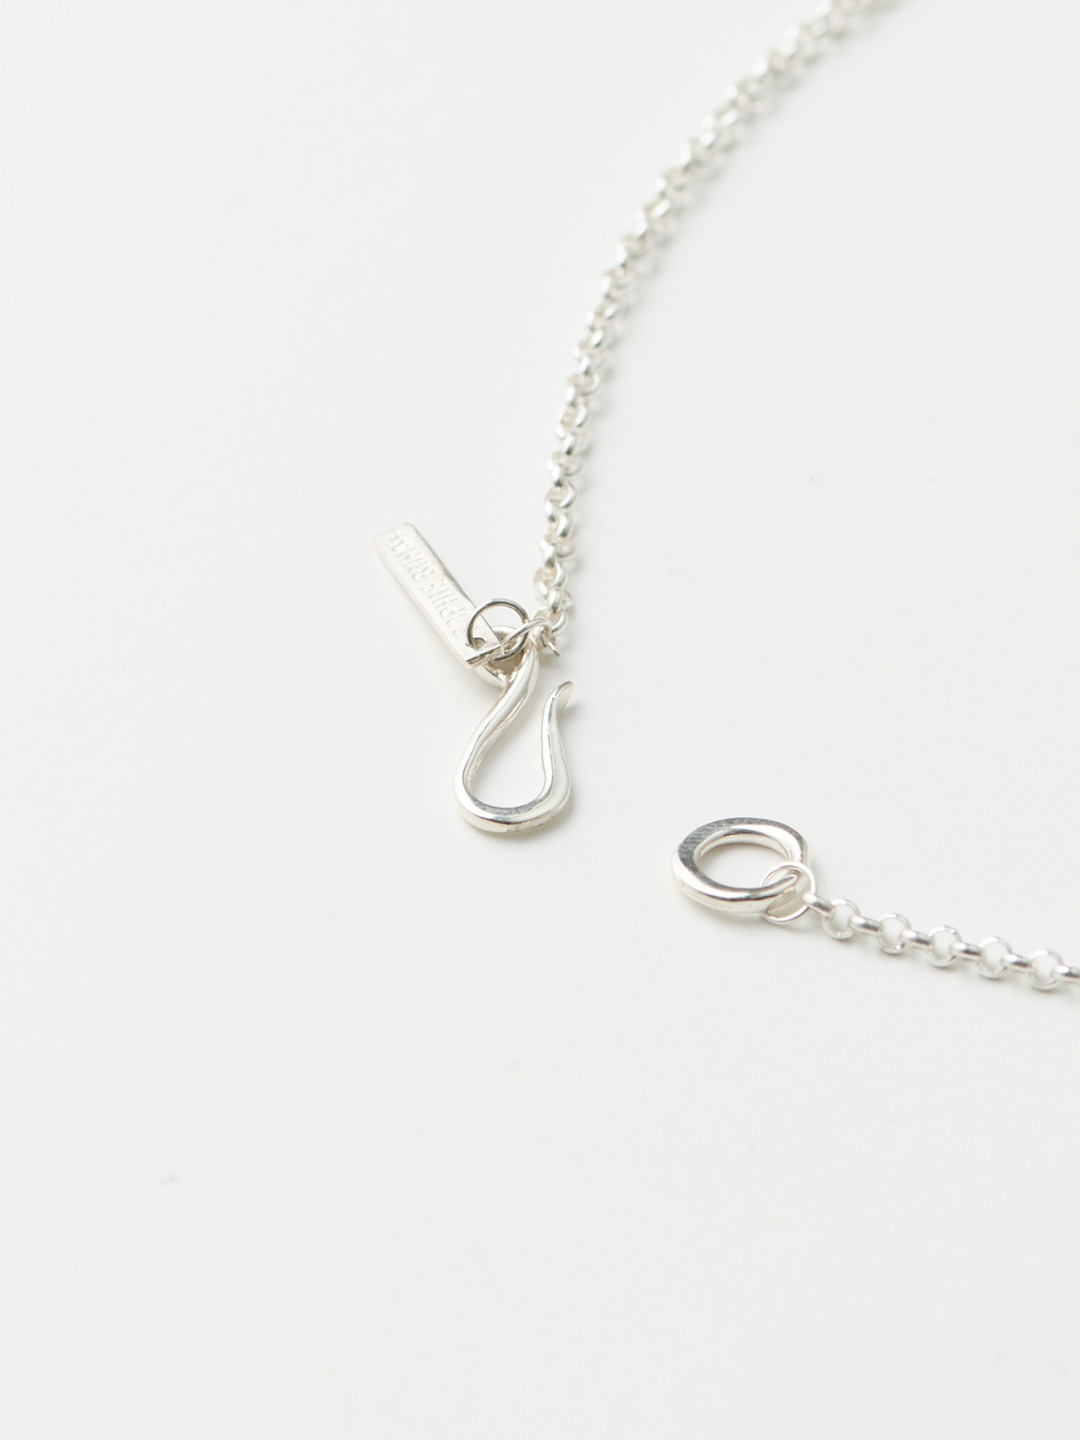 Nage Chain Necklace 40cm - Silver